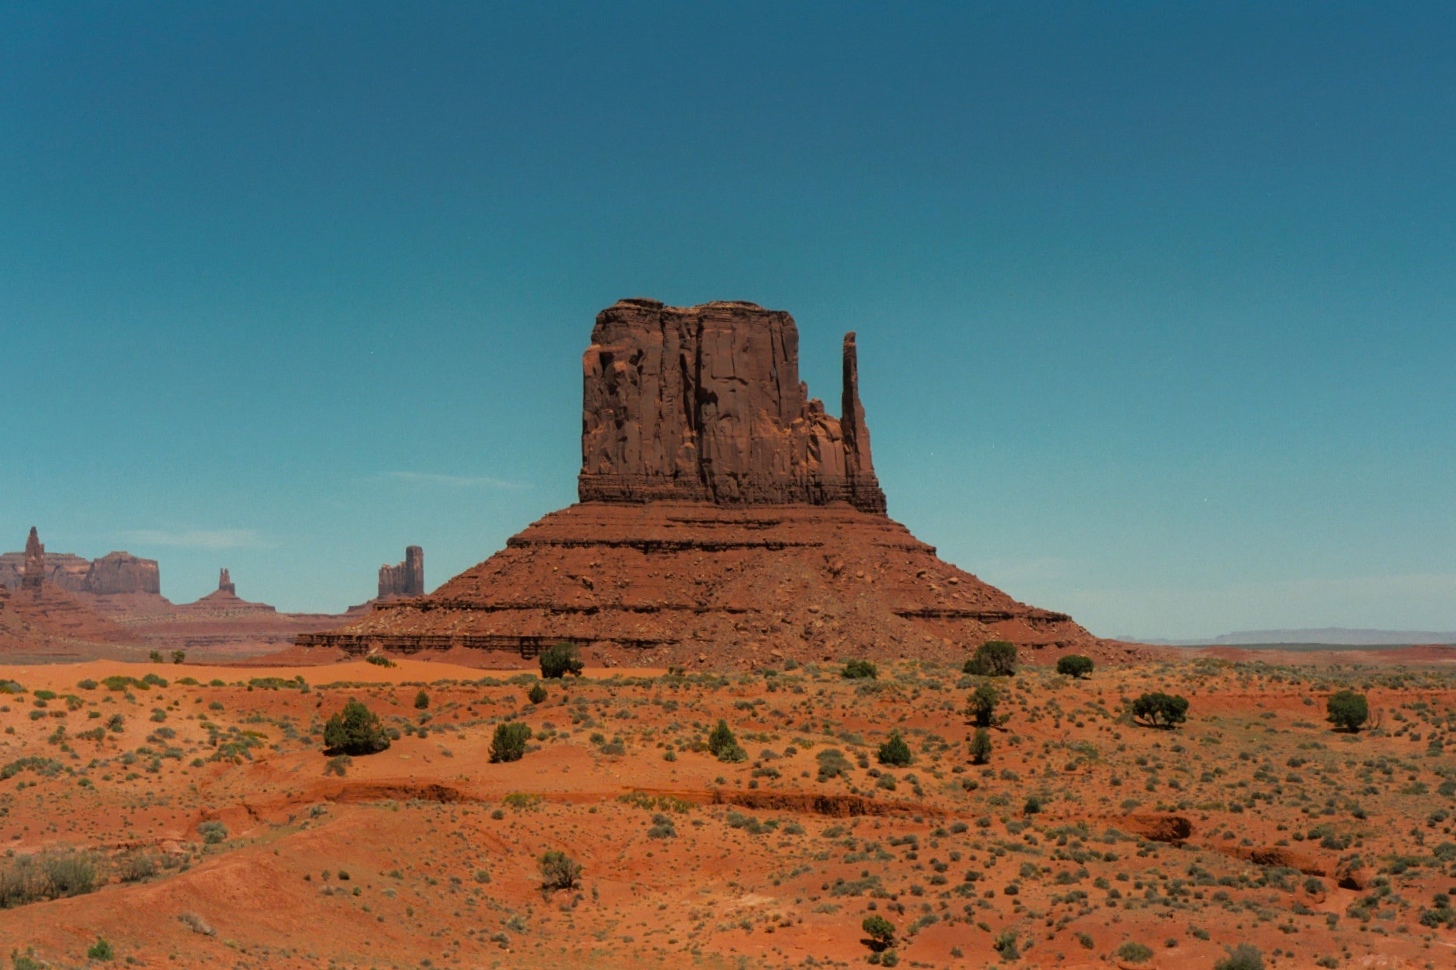 Huge, crumbling, red sandstone formations, as seen in many old Westerns.